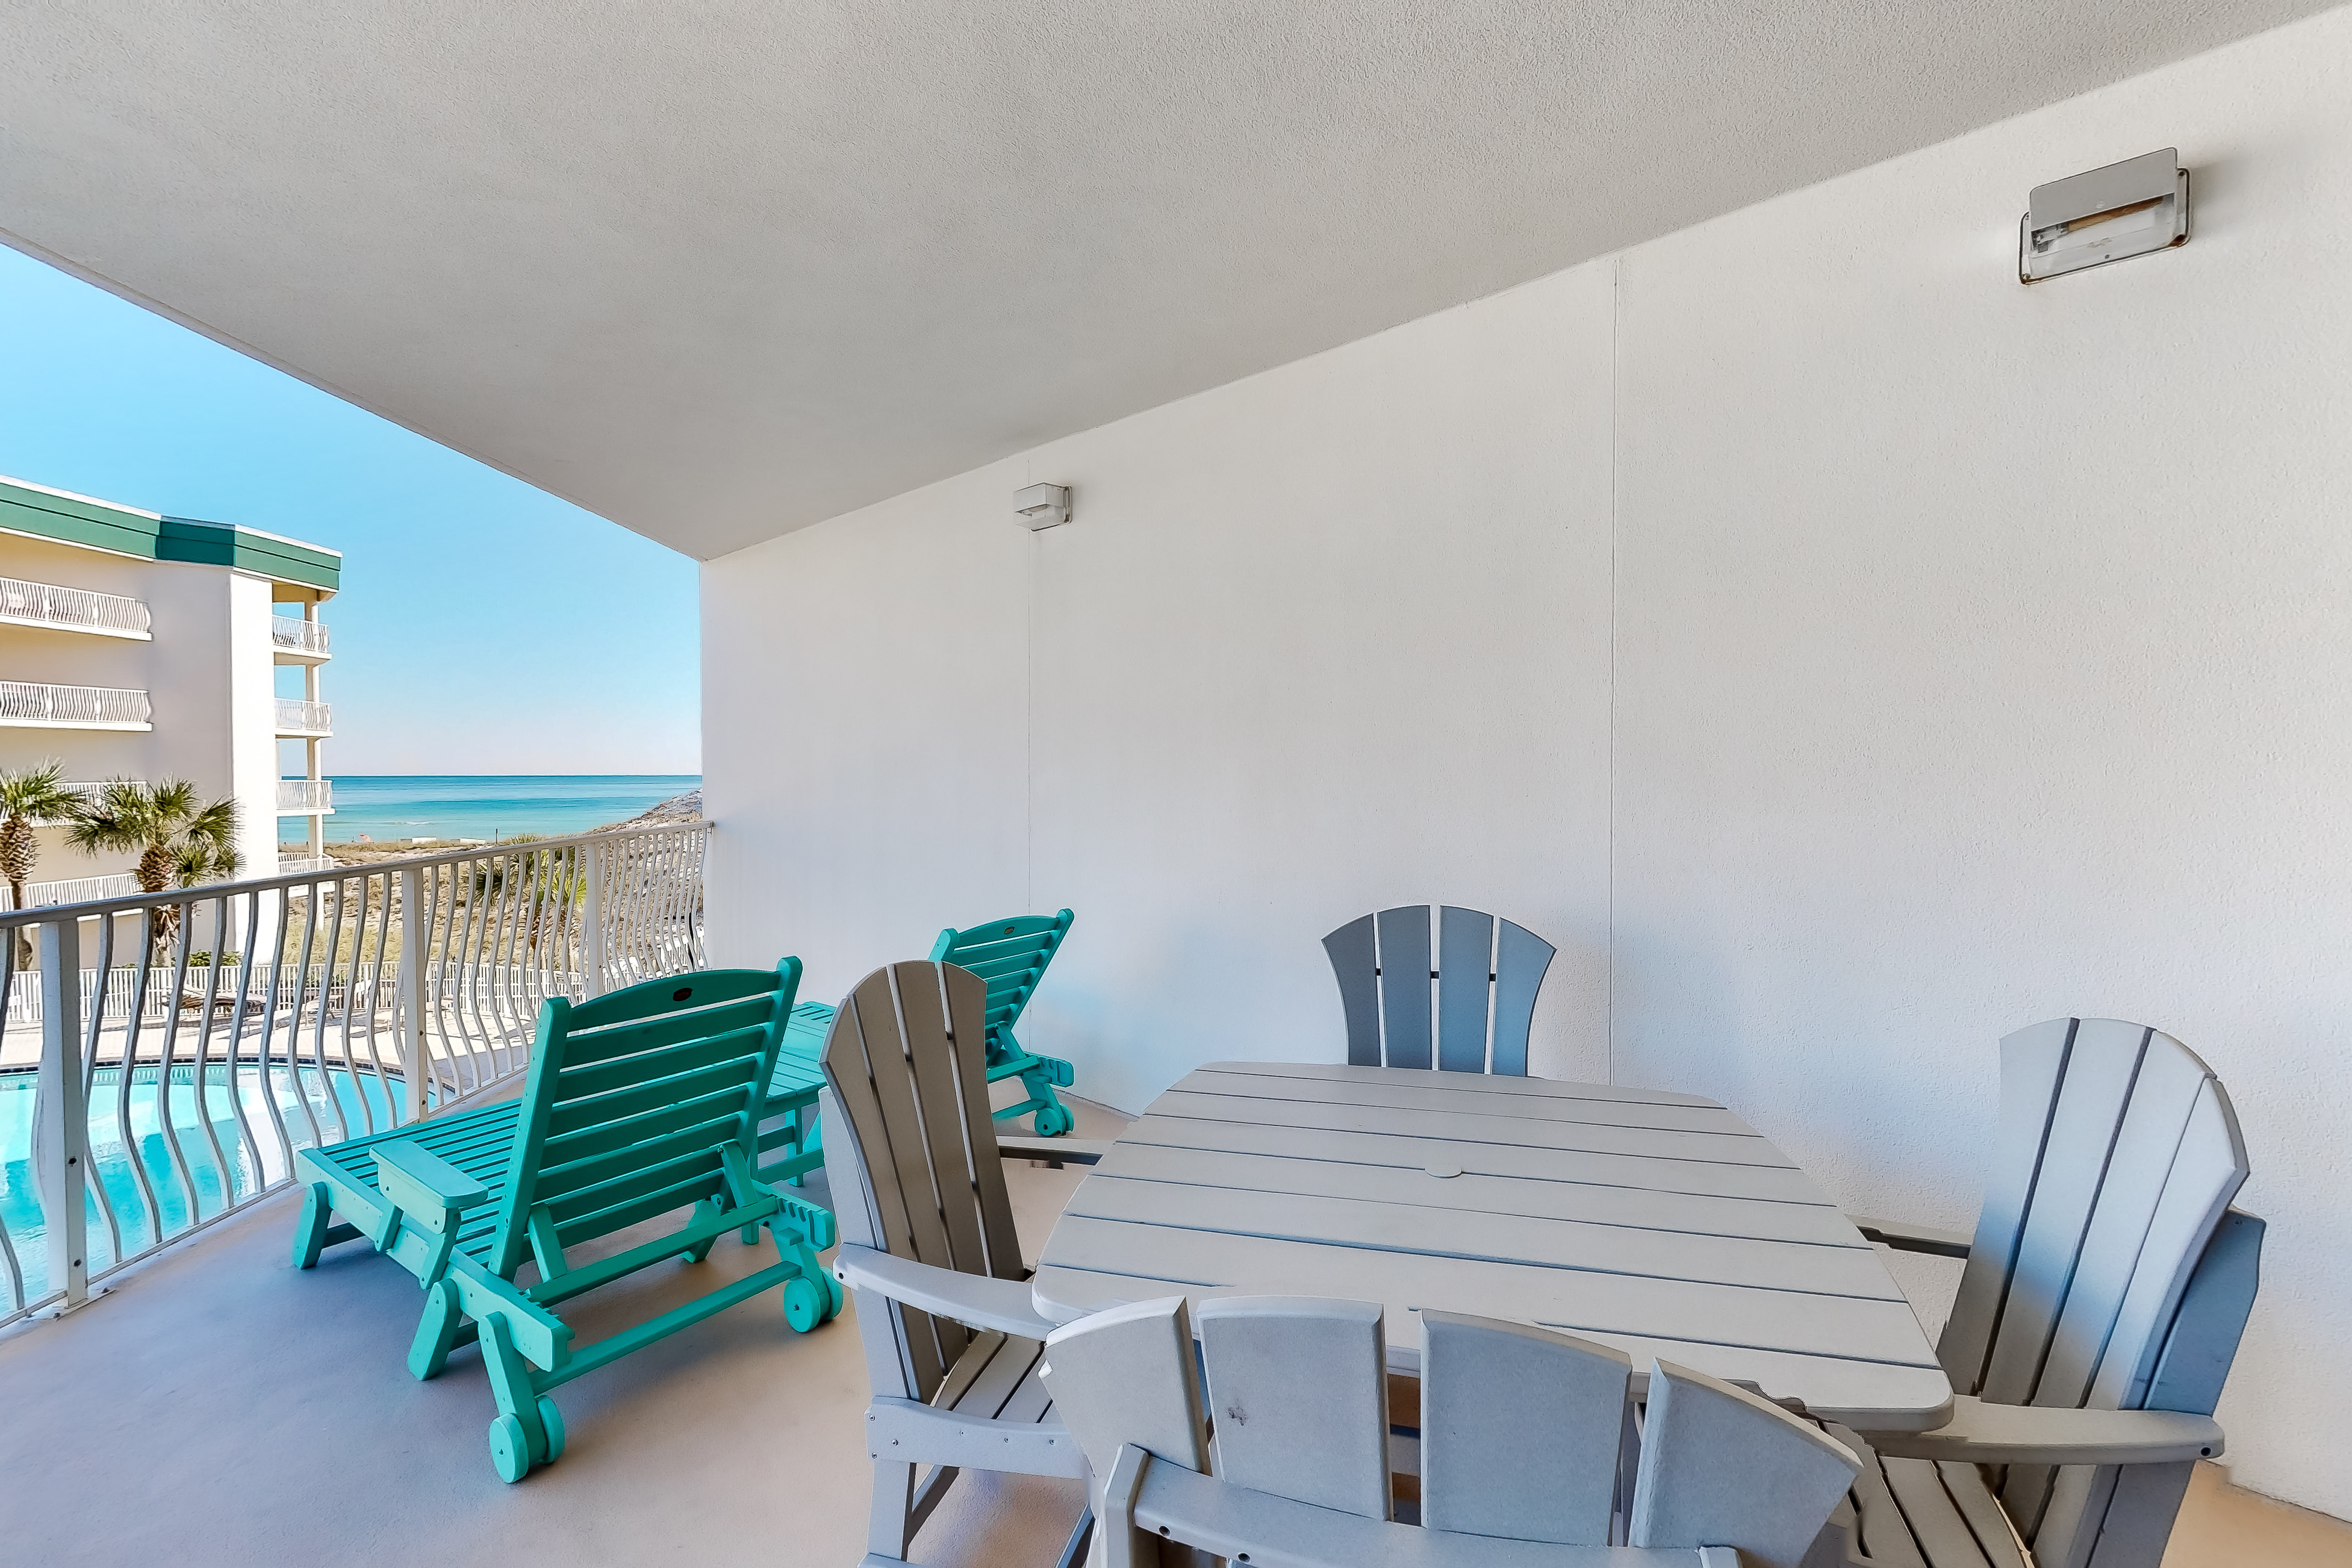 Dunes of Seagrove B202 Condo rental in Dunes of Seagrove in Highway 30-A Florida - #17